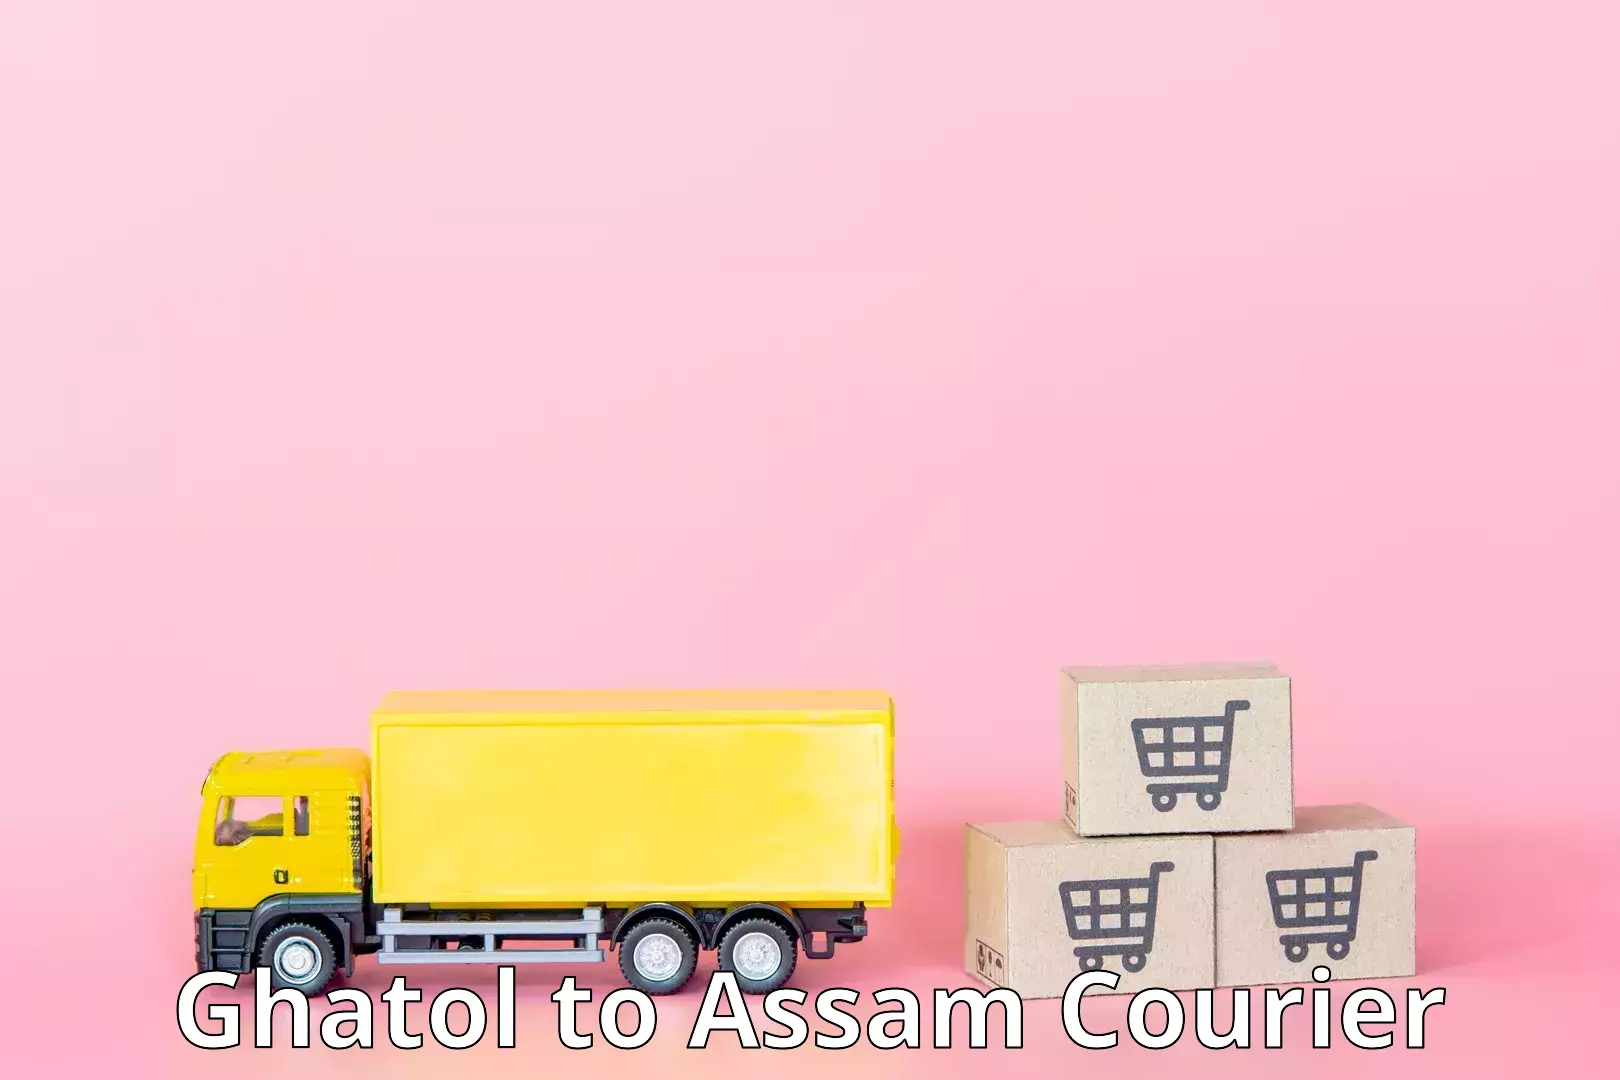 Reliable courier services Ghatol to Guwahati